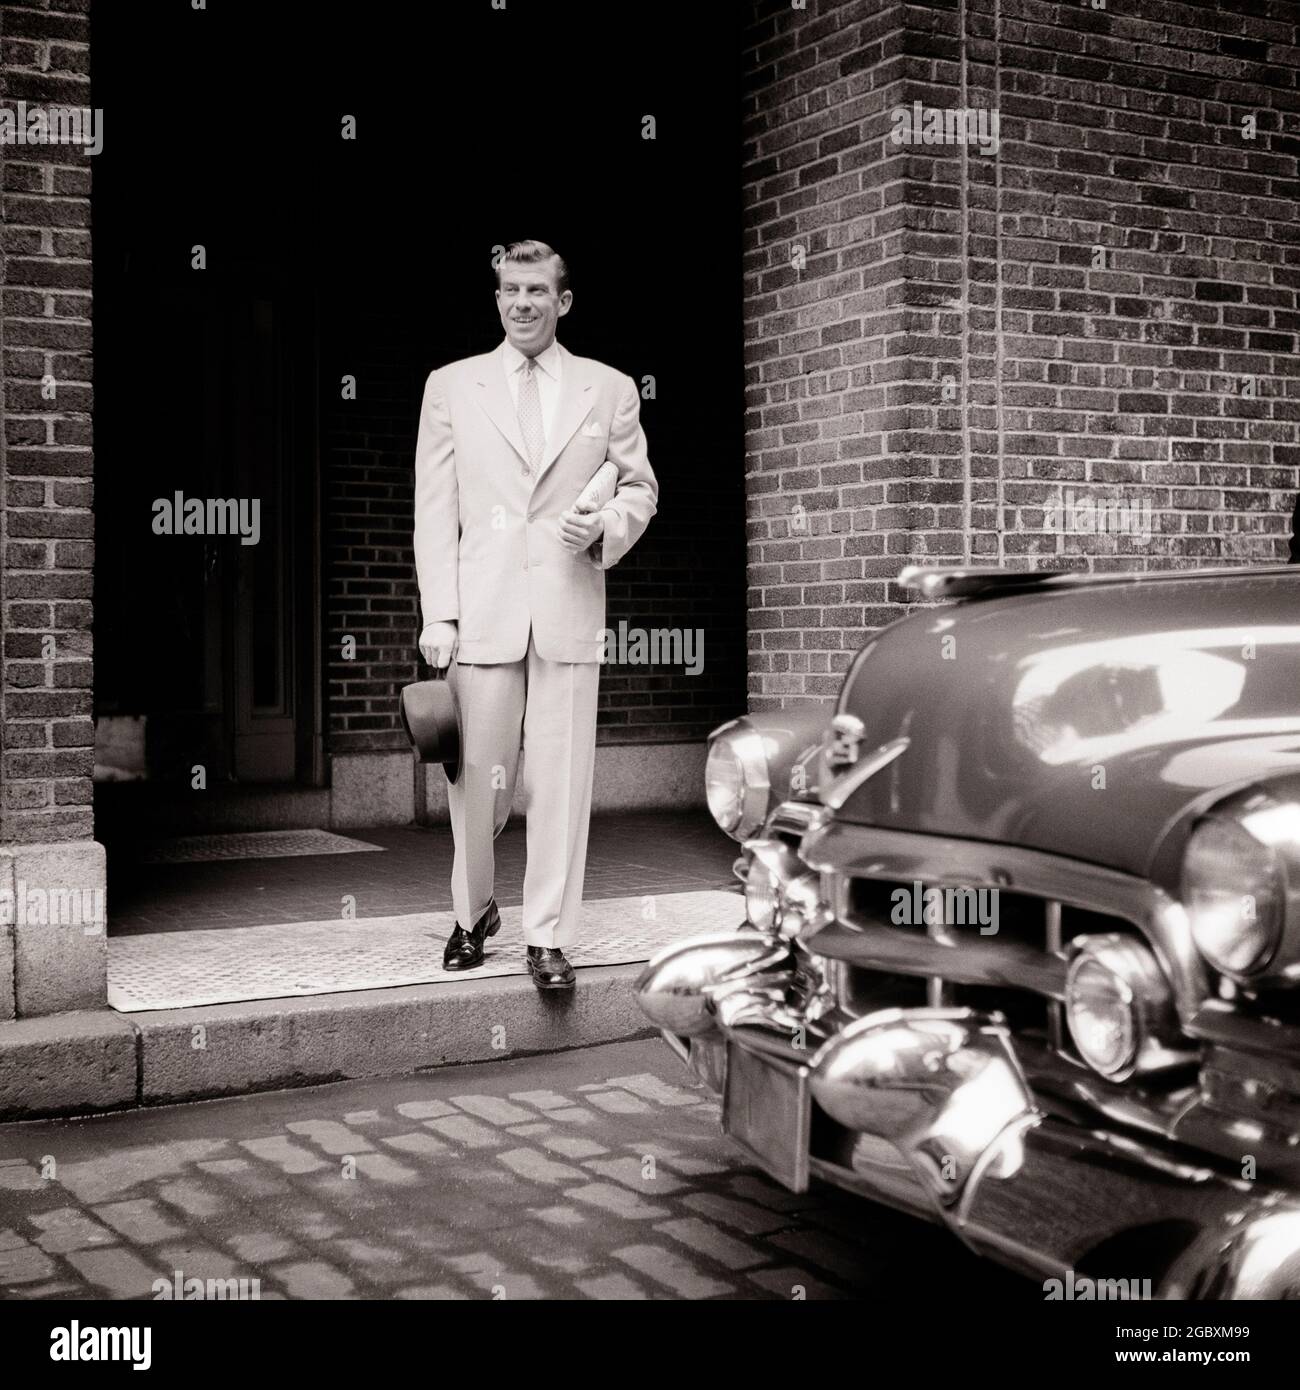 1950s DAPPER MAN DRESSED IN LIGHT SUIT TIE HAT STEPPING FROM BRICK BUILDING TO HIS CLASSIC CADILLAC AUTOMOBILE ON CITY STREET  - s6153 CRR001 HARS WEALTHY INFORMATION PLEASED JOY LIFESTYLE SATISFACTION BRICK STEPPING LUXURY COPY SPACE FULL-LENGTH PHYSICAL FITNESS PERSONS INSPIRATION AUTOMOBILE CARING MALES CONFIDENCE TRANSPORTATION B&W TEMPTATION SUIT AND TIE HAPPINESS CHEERFUL HIS LEISURE STRENGTH AUTOS CHOICE EXTERIOR LEADERSHIP LOW ANGLE POWERFUL PROGRESS PRIDE AUTHORITY OCCUPATIONS SMILES CONCEPTUAL AUTOMOBILES CADILLAC DAPPER JOYFUL VEHICLES WELL TO DO CREATIVITY IDEAS MID-ADULT Stock Photo